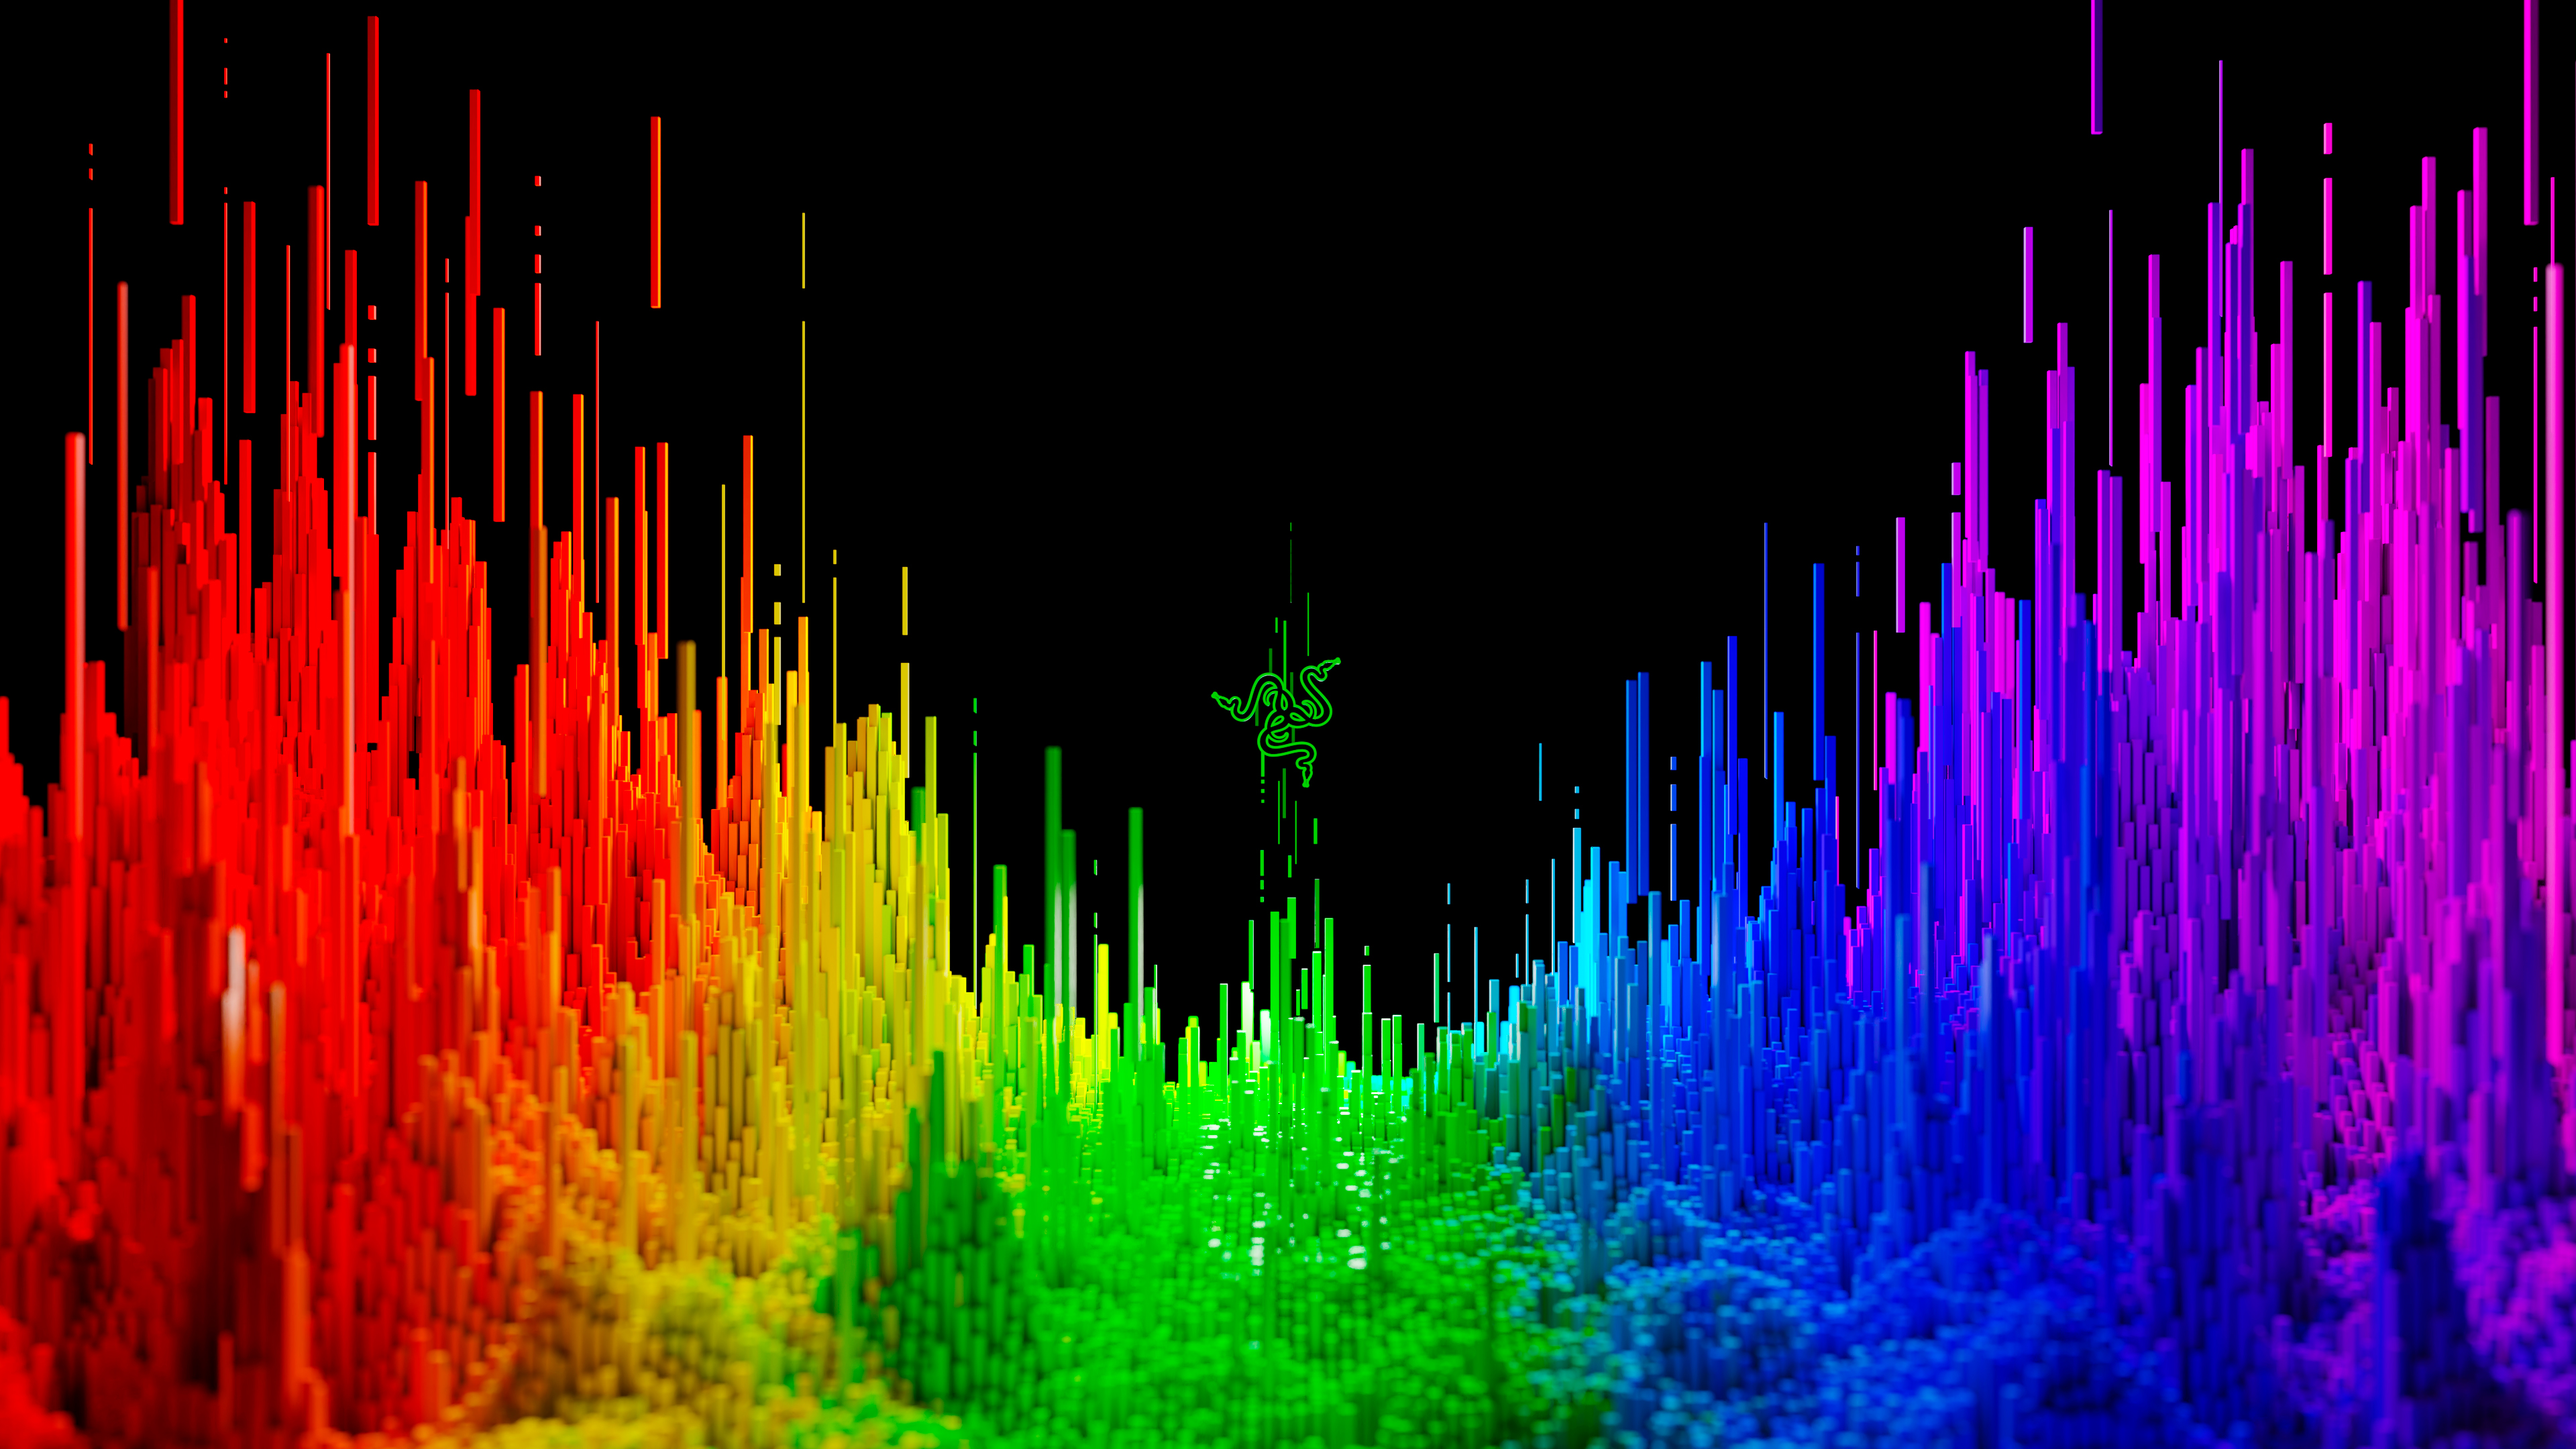 Abstract Colorful Razer Inc Purple Blue Green Yellow Red Black 3840x2160